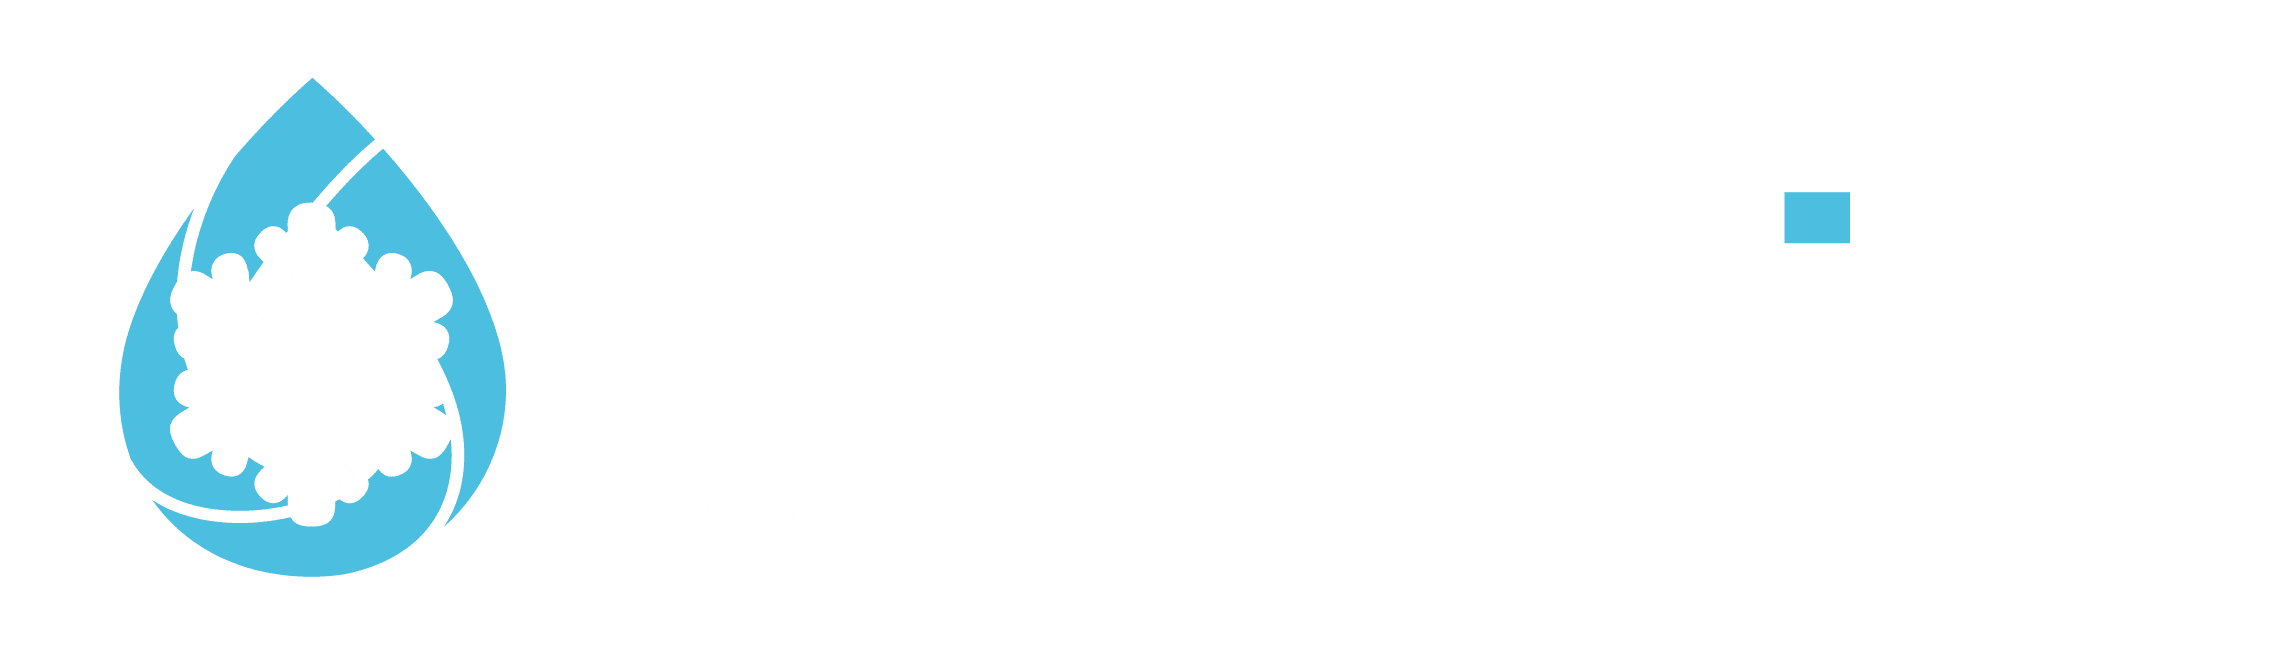 Ductless Mini-Split System Service |  Elite Heating and Air